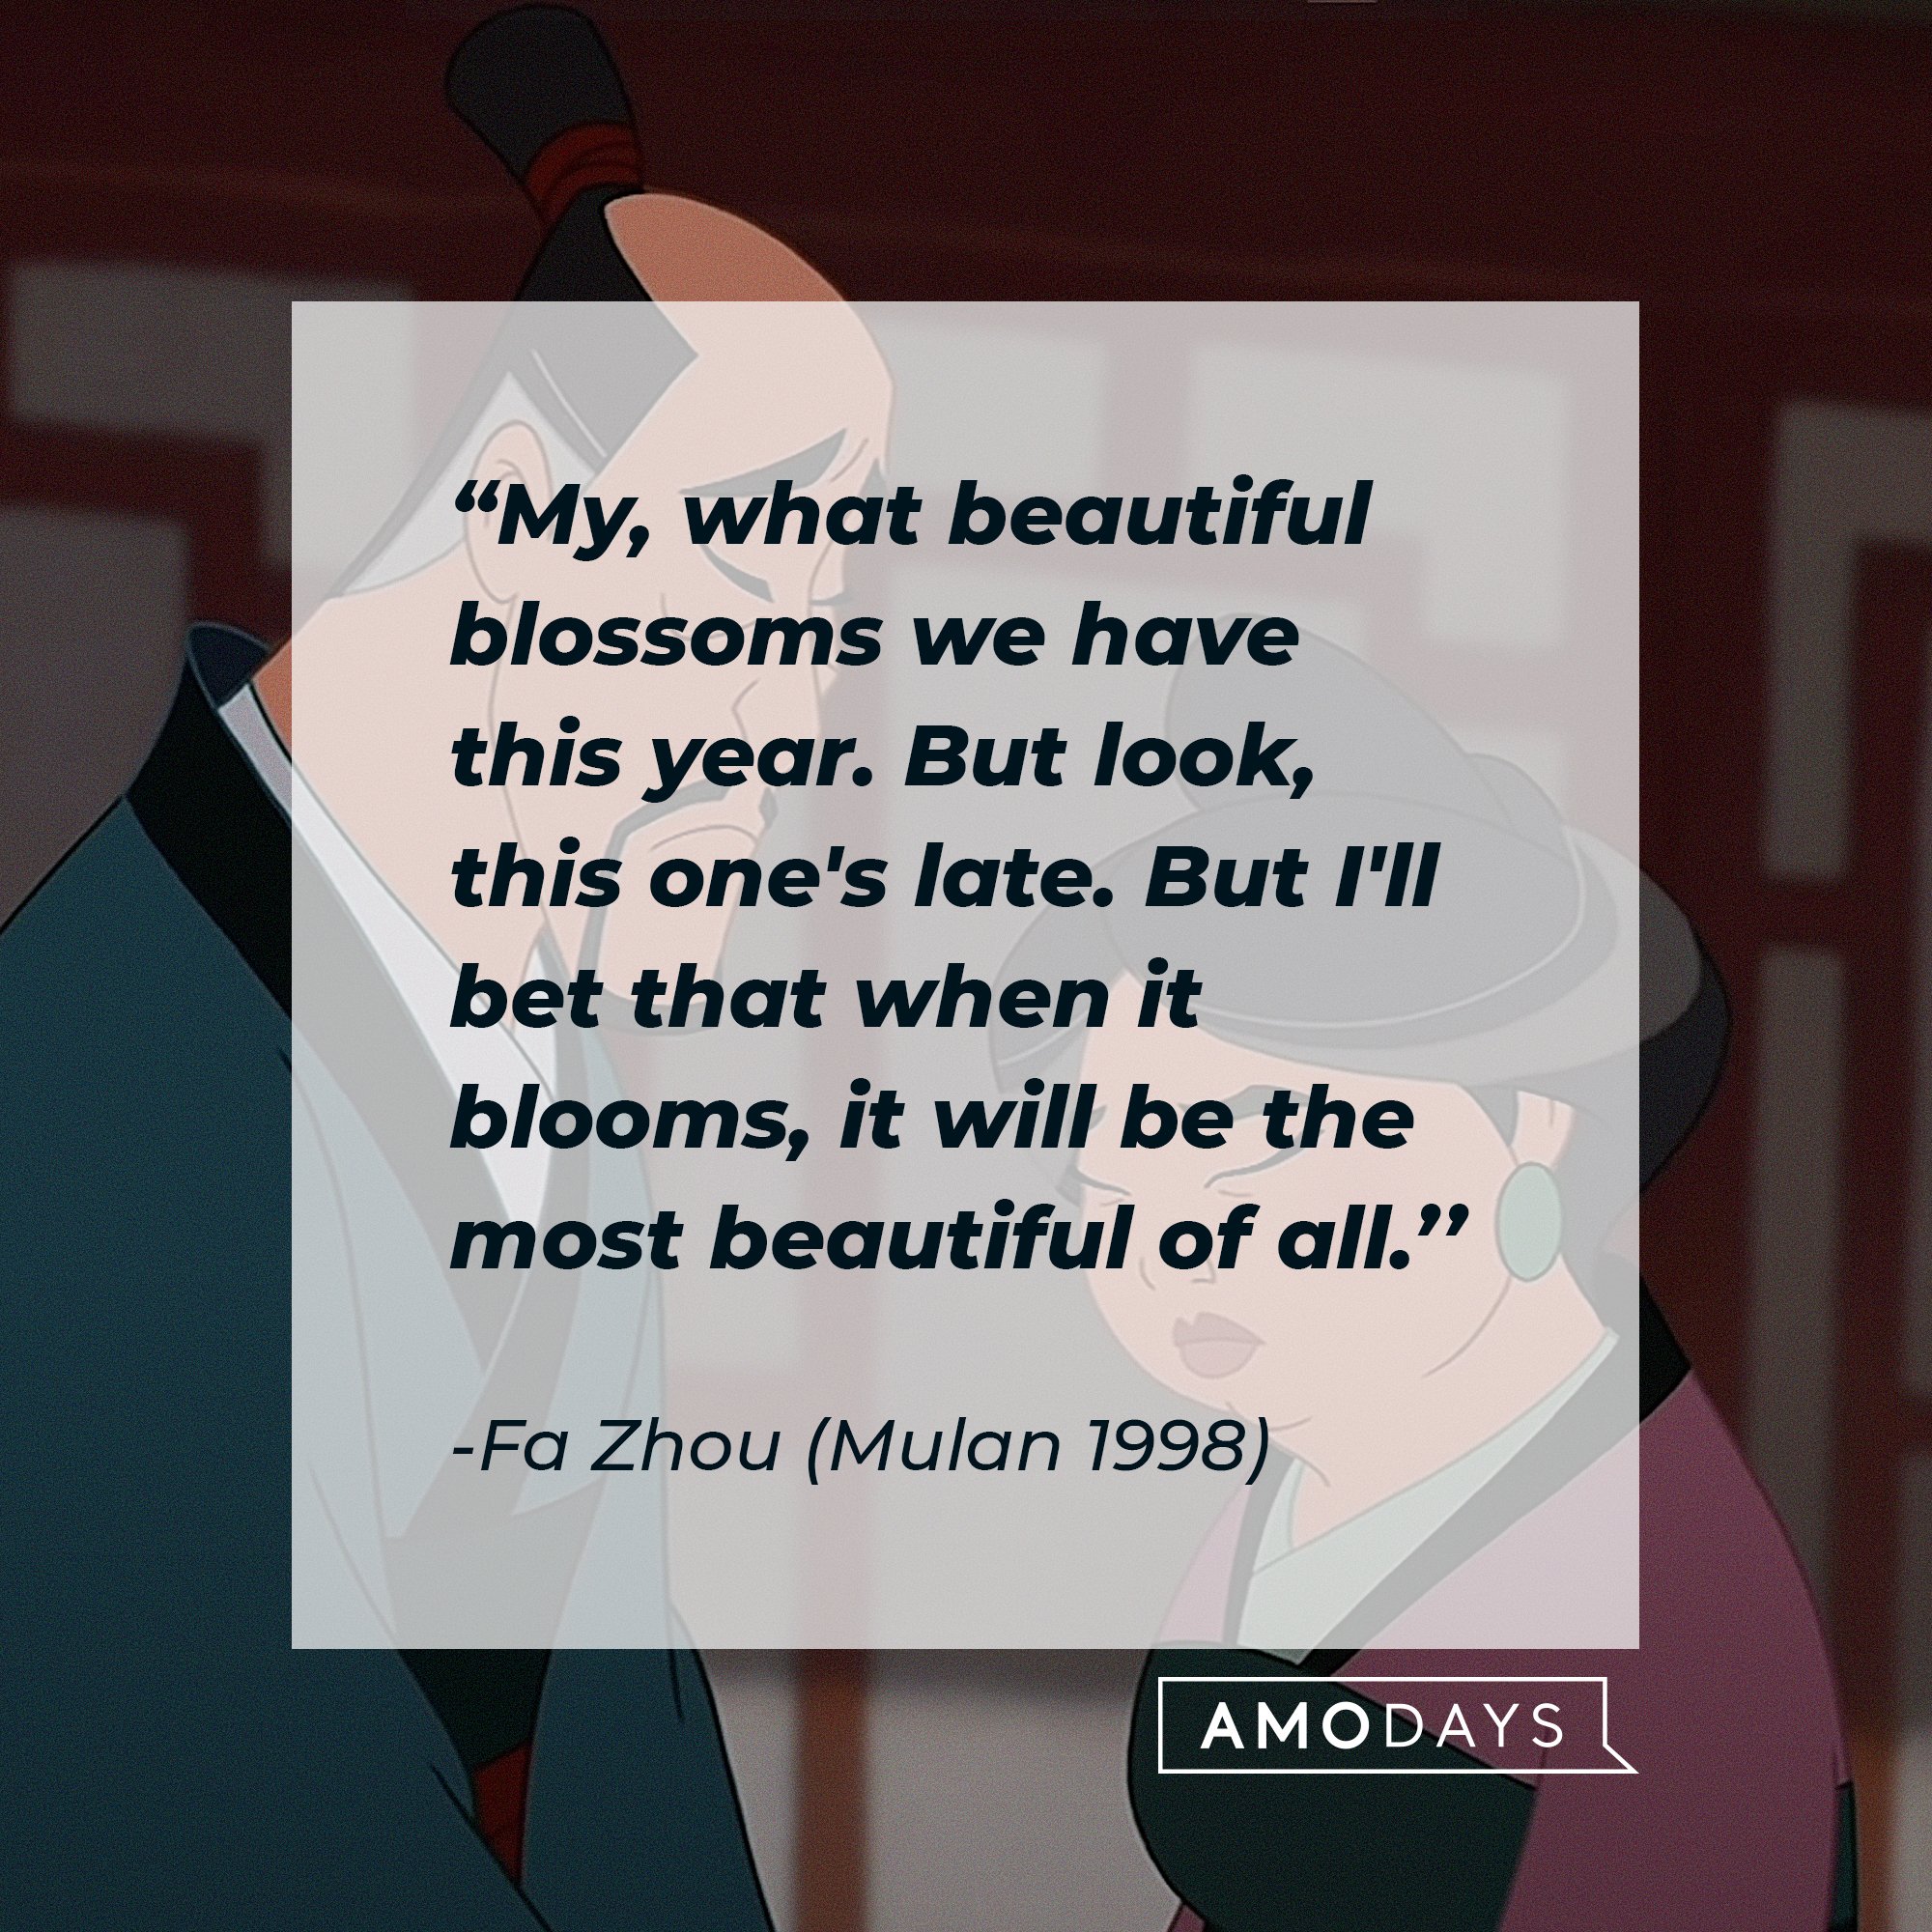  Fa Zhou’s quote: "My, what beautiful blossoms we have this year. But look, this one's late. But I'll bet that when it blooms, it will be the most beautiful of all." | Image: AmoDays